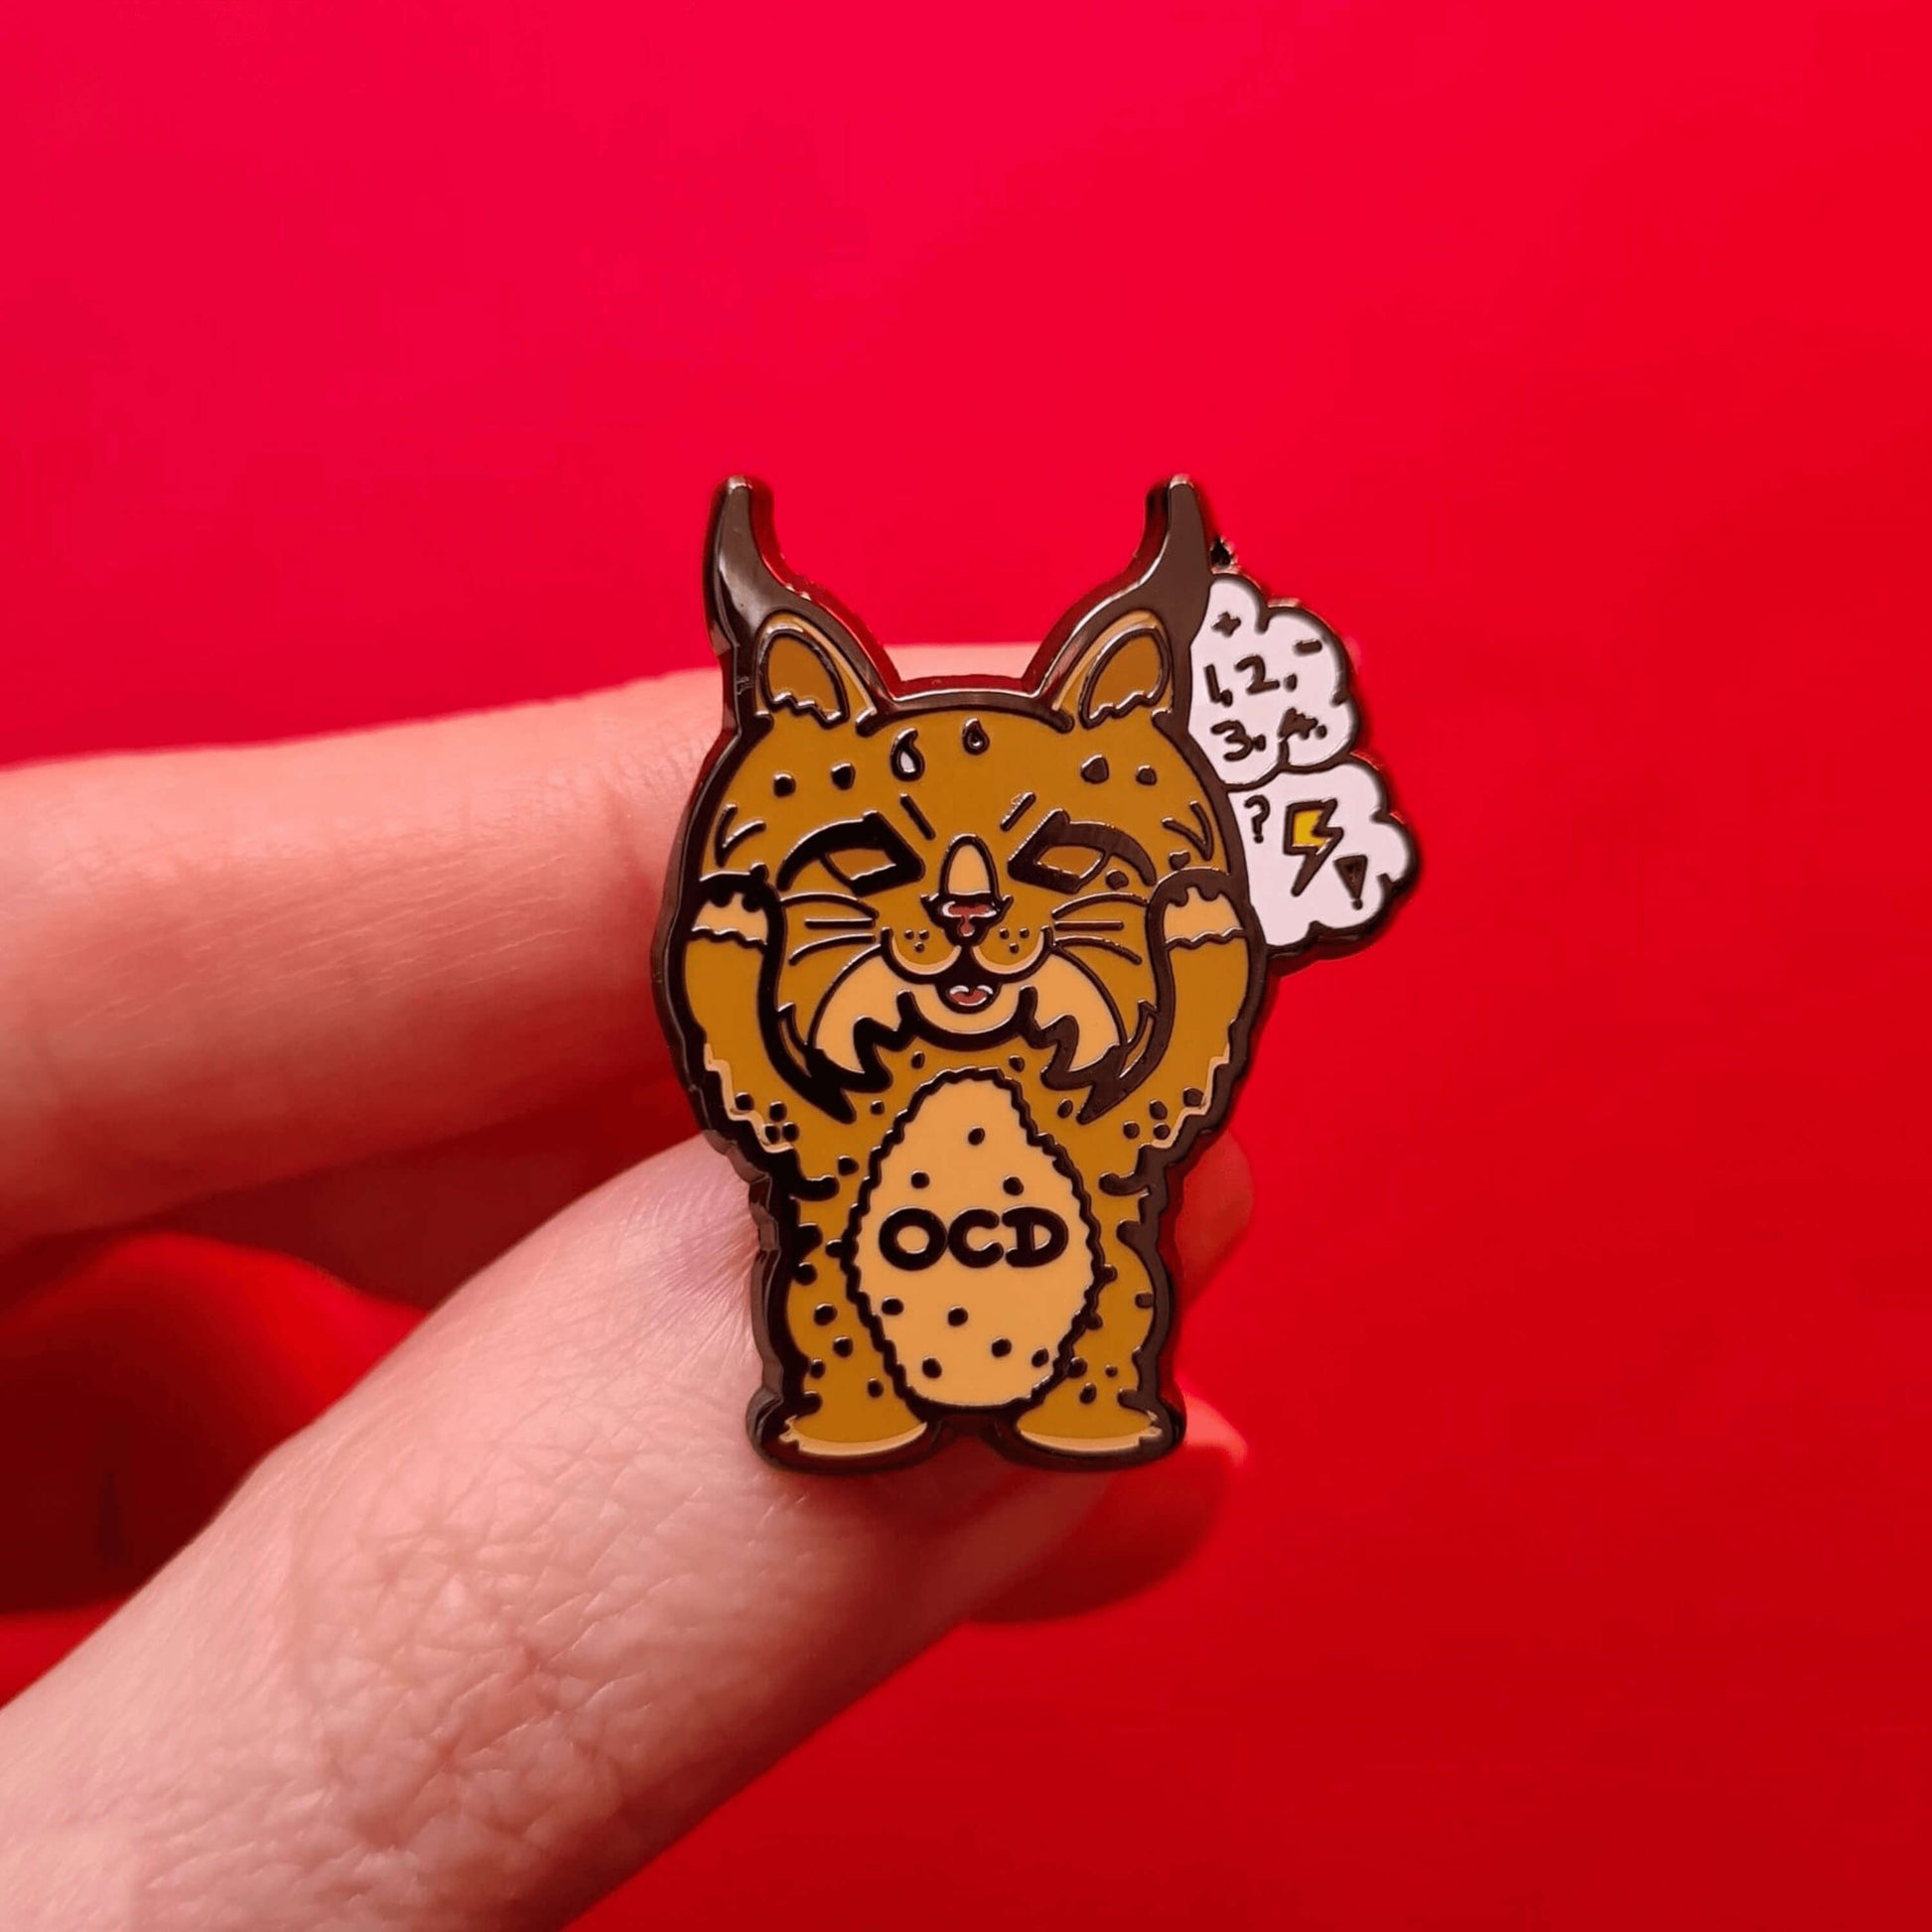 Bobsessive Compulsive Disorder Enamel Pin - OCD being held over a red background. The bobcat shape pin is brown with a stressed expression clutching its face with a thought bubble of numbers, question marks and lightning bolts. Across its tummy reads OCD. The pin was designed to raise awareness of obsessive compulsive disorder.